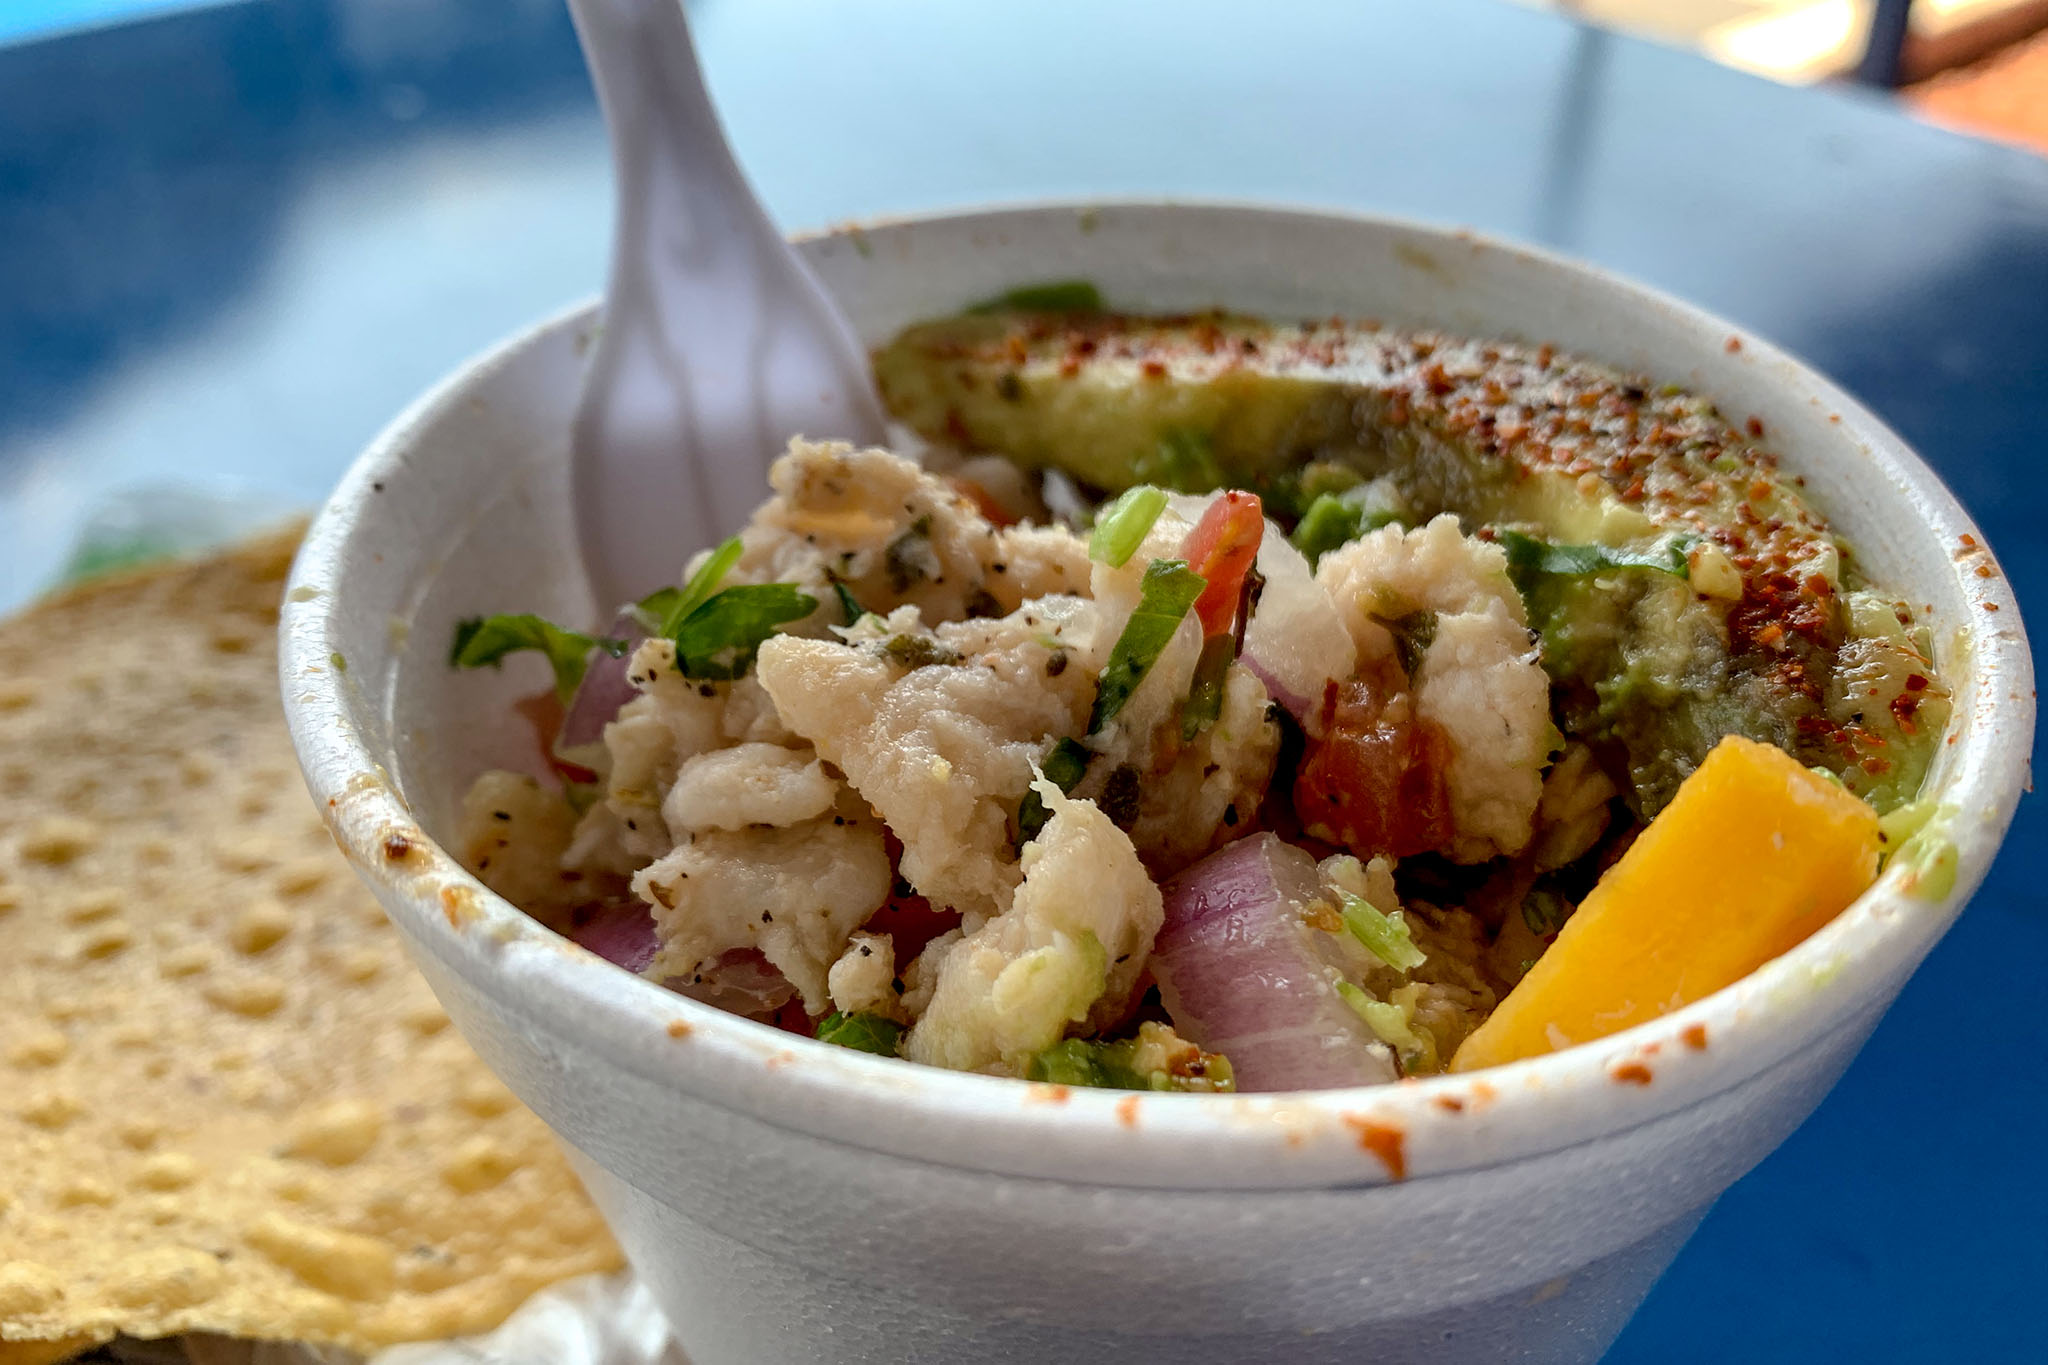 The Seafood la 57 mariscos truck is nothing new | San Diego Reader